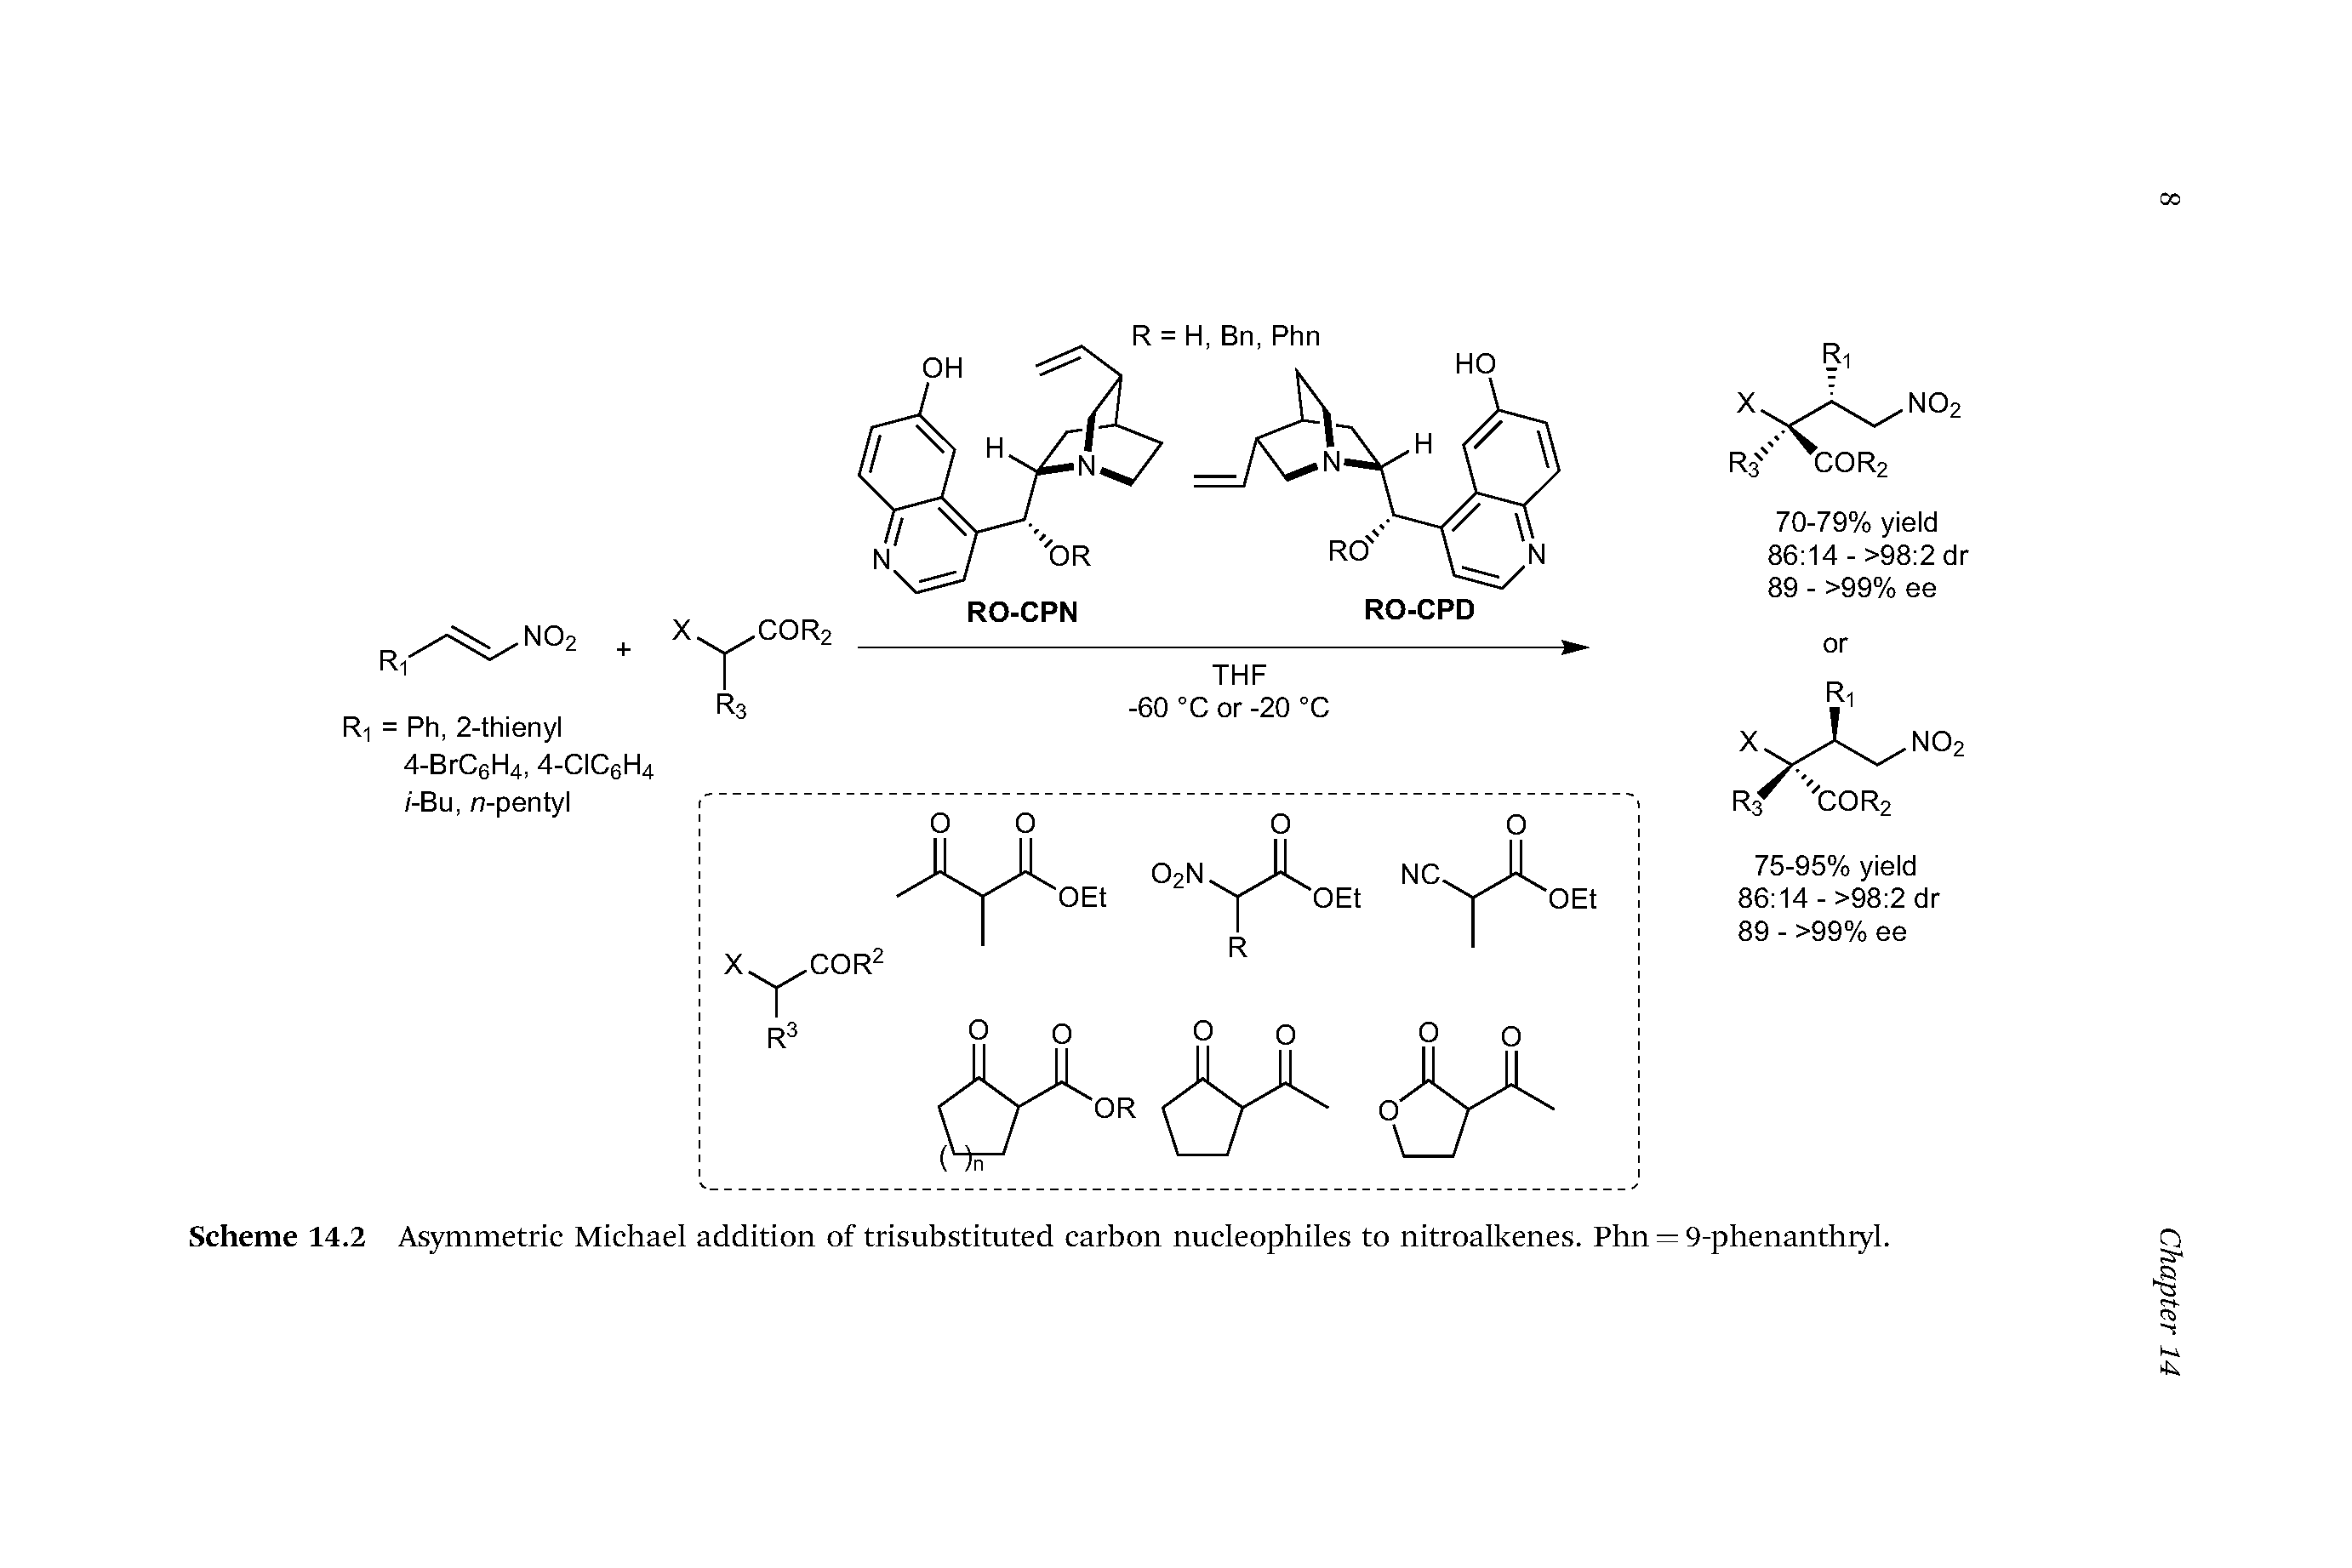 Scheme 14.2 Asymmetric Michael addition of trisubstituted carbon nucleophiles to nitroalkenes. Phn = 9-phenanthryl.